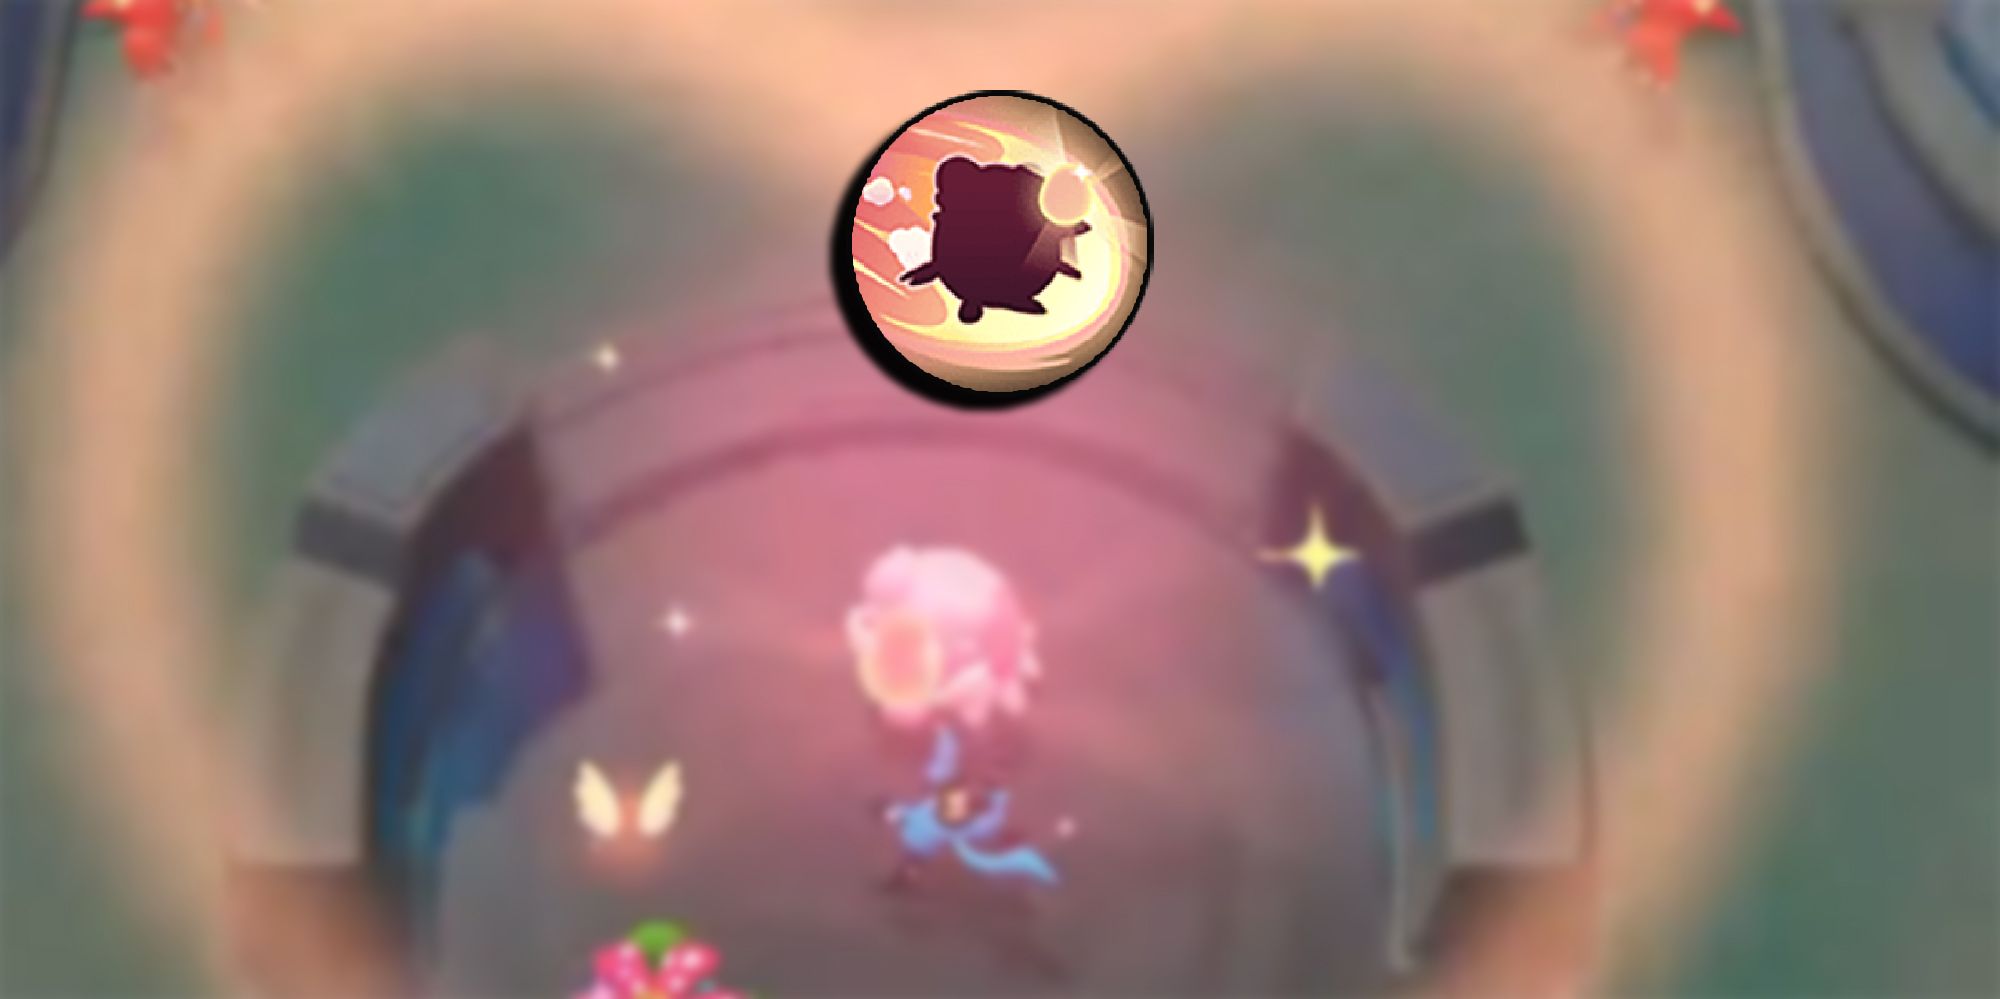 Pokemon Unite - Blissey Using Their Unite Move In The Intro Trailer With The PNG For The Unite Move Overlaid On Top